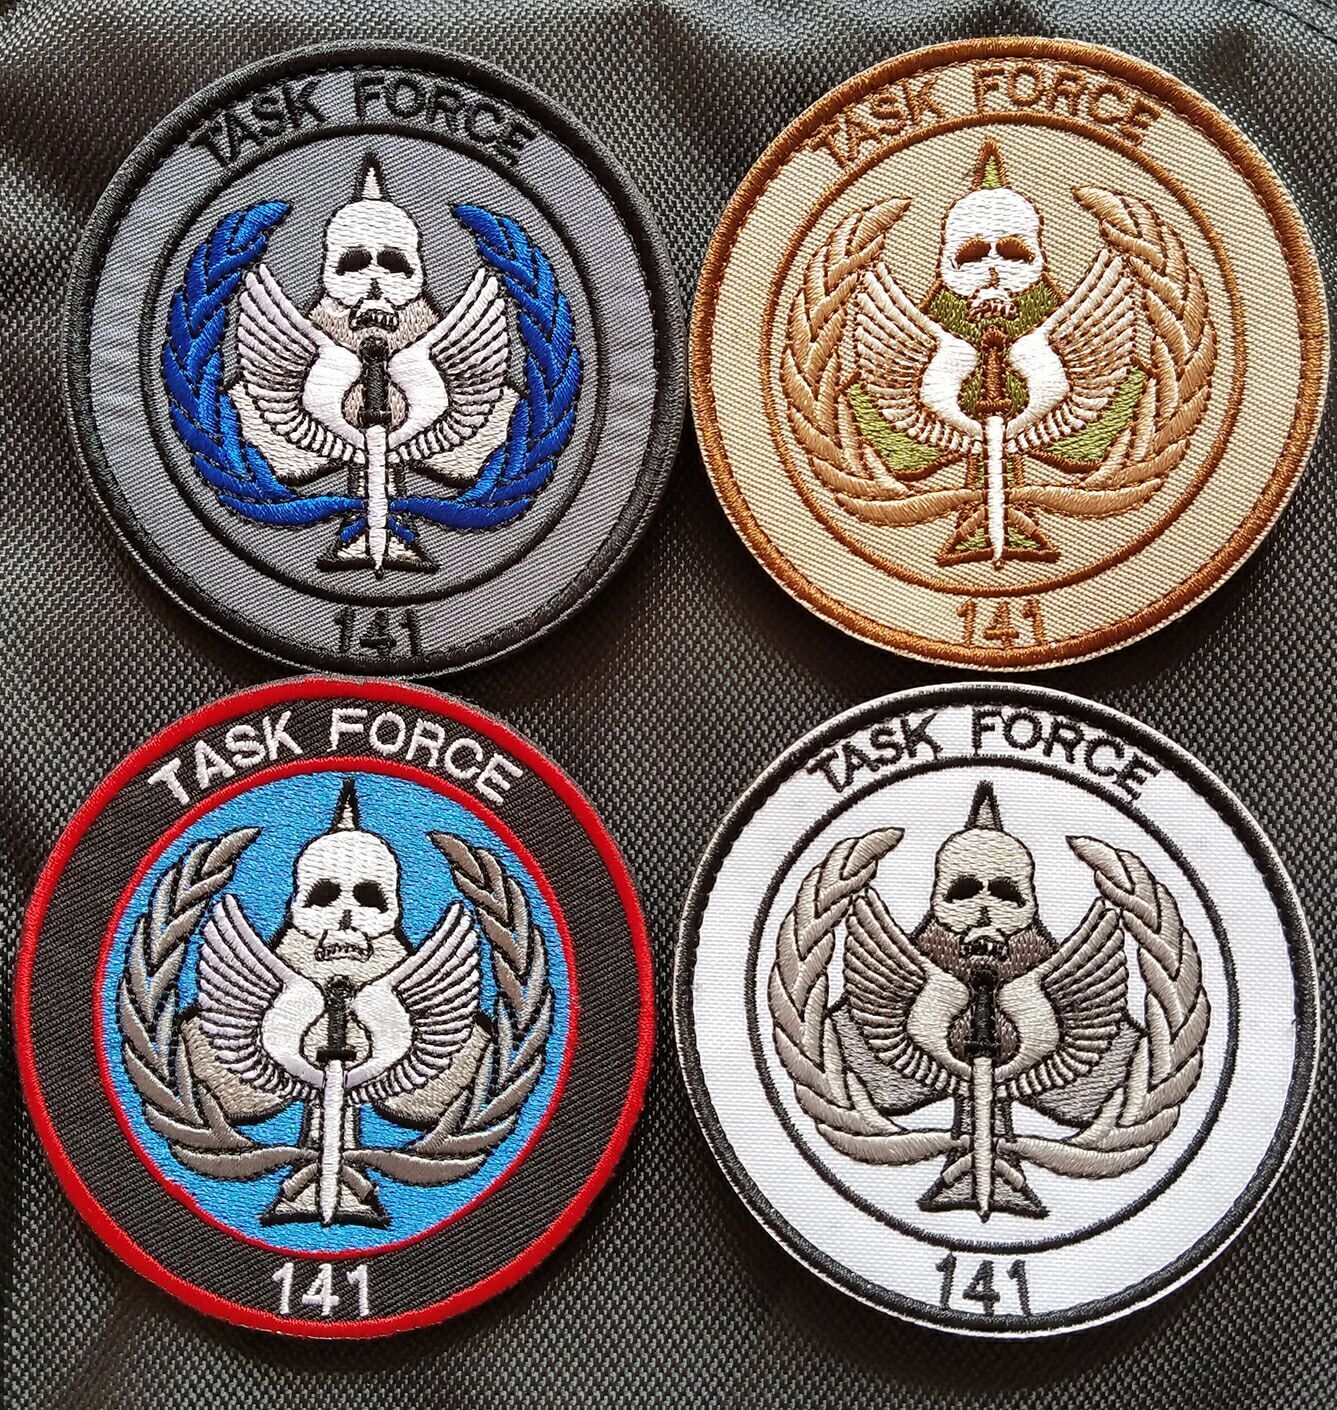 4PCS CALL OF DUTY TASK FORCE 141 TACTICAL MILITARY HOOK LOOP PATCH BADGE TAN